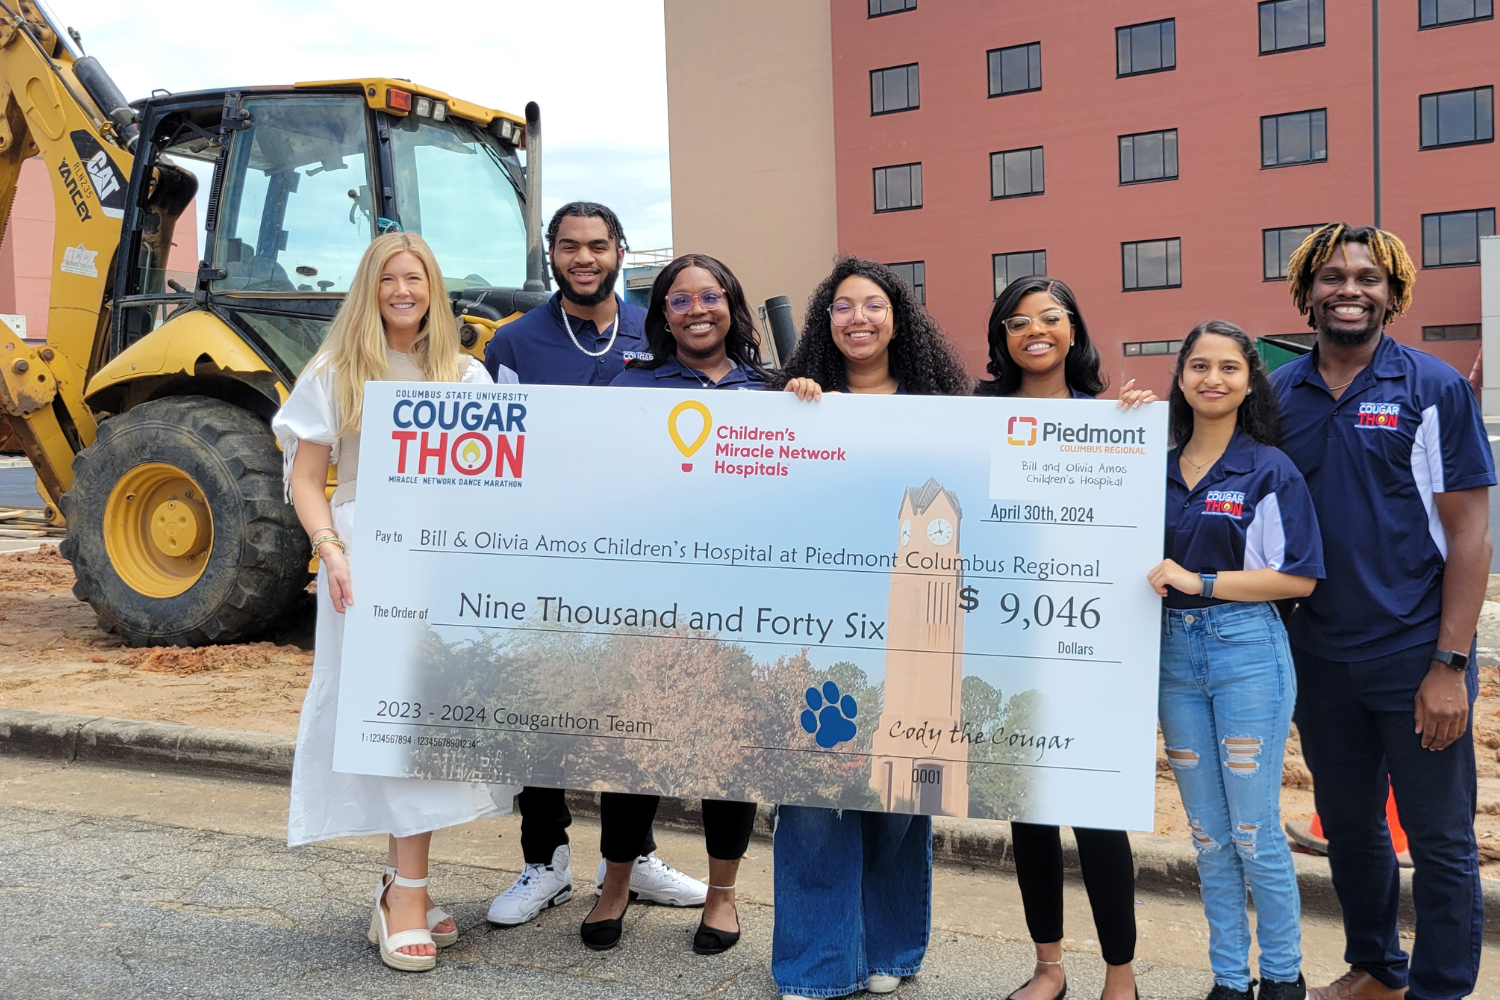 Group of people posed in front of a construction site holding a $9,046 "big check" to Bill and Olivia Amos Children's Hospital at Piedmont Columbus Regional